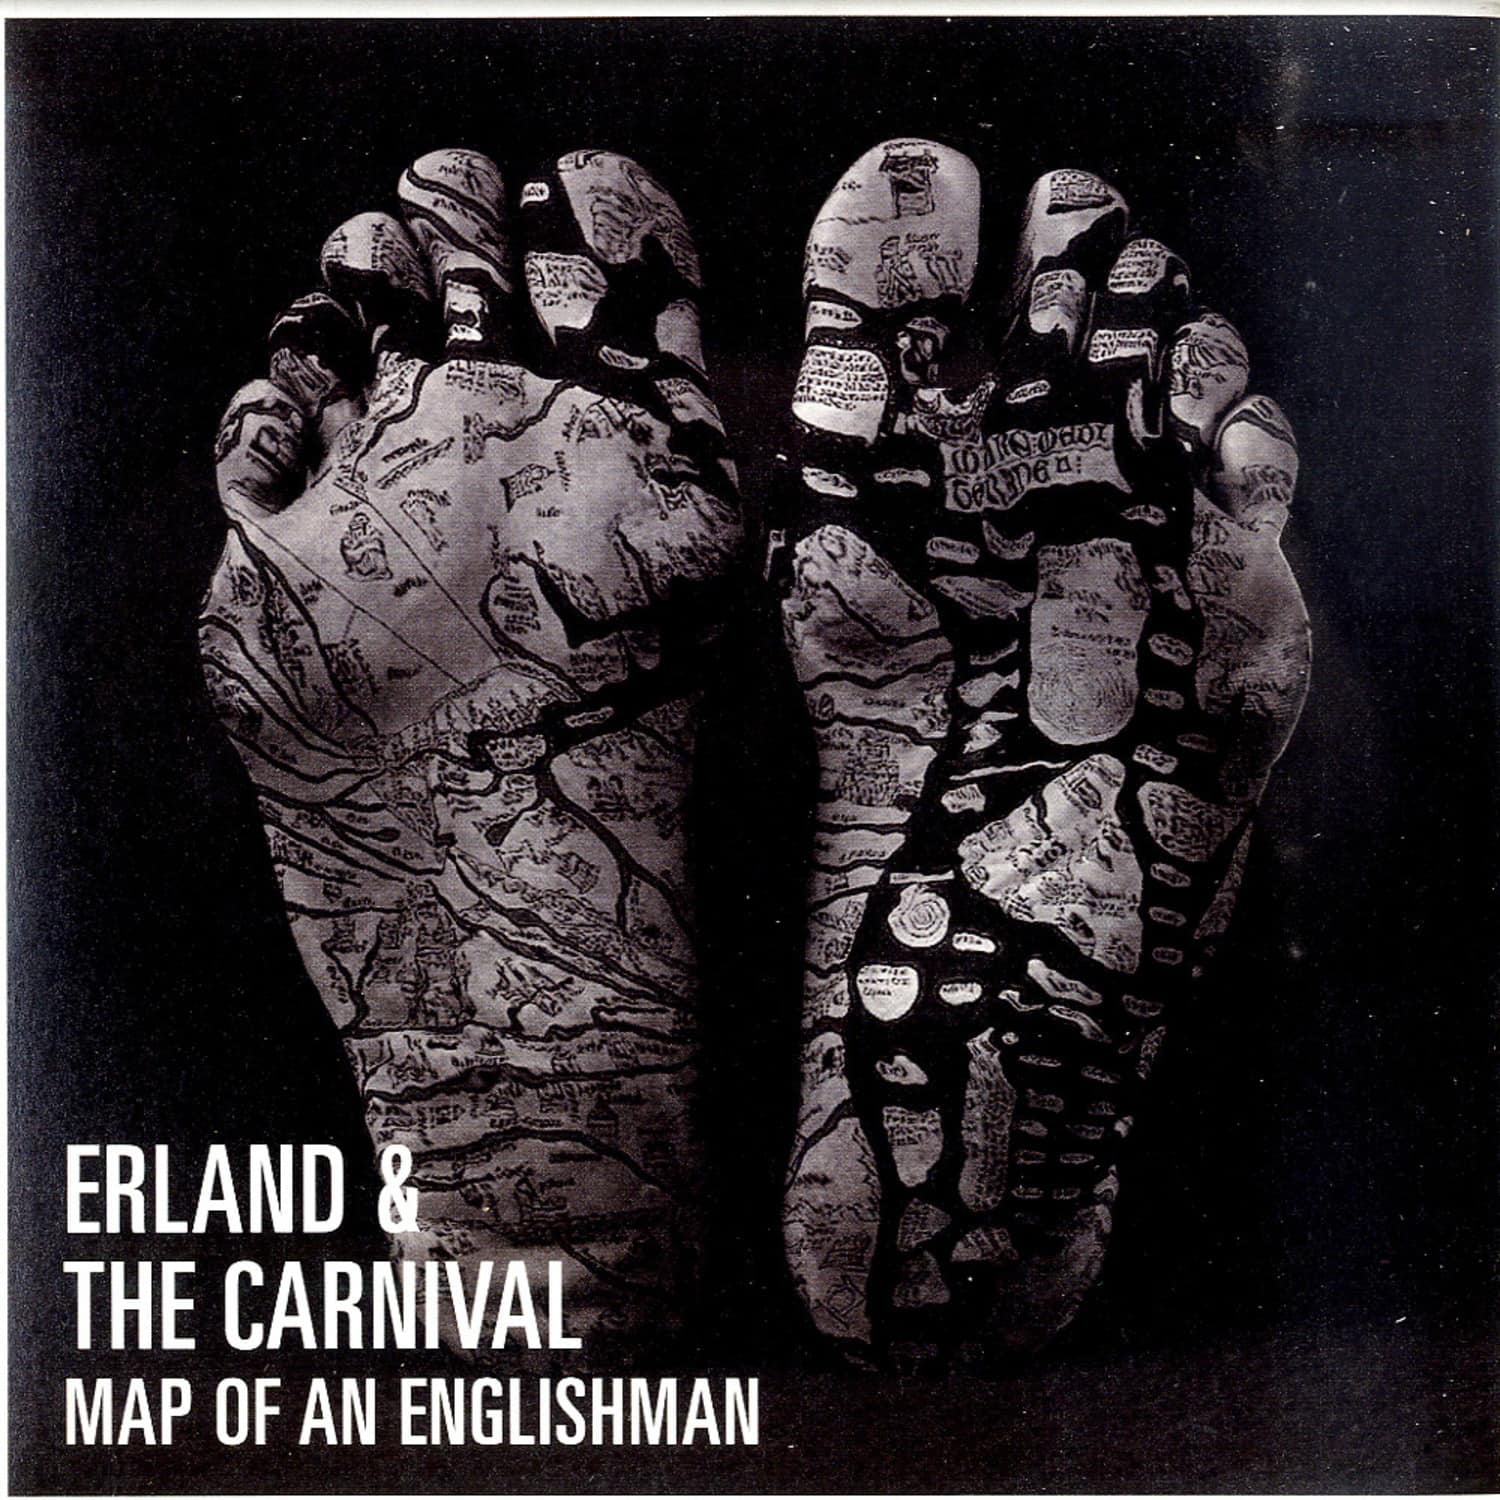 Erland & The Carnival - MAP OF AN ENGLISHMAN 